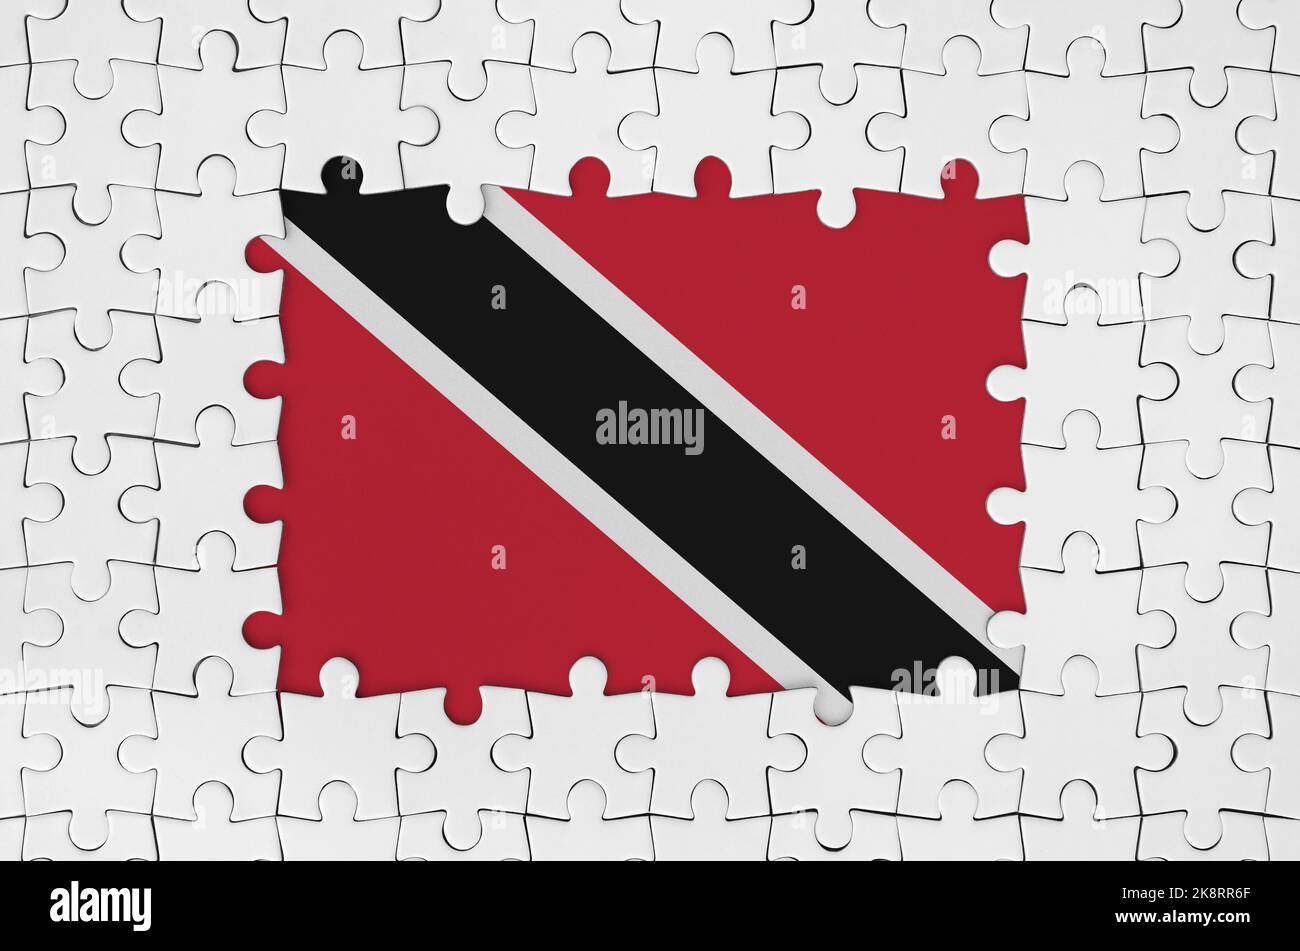 Trinidad and Tobago flag in frame of white puzzle pieces with missing central parts Stock Photo